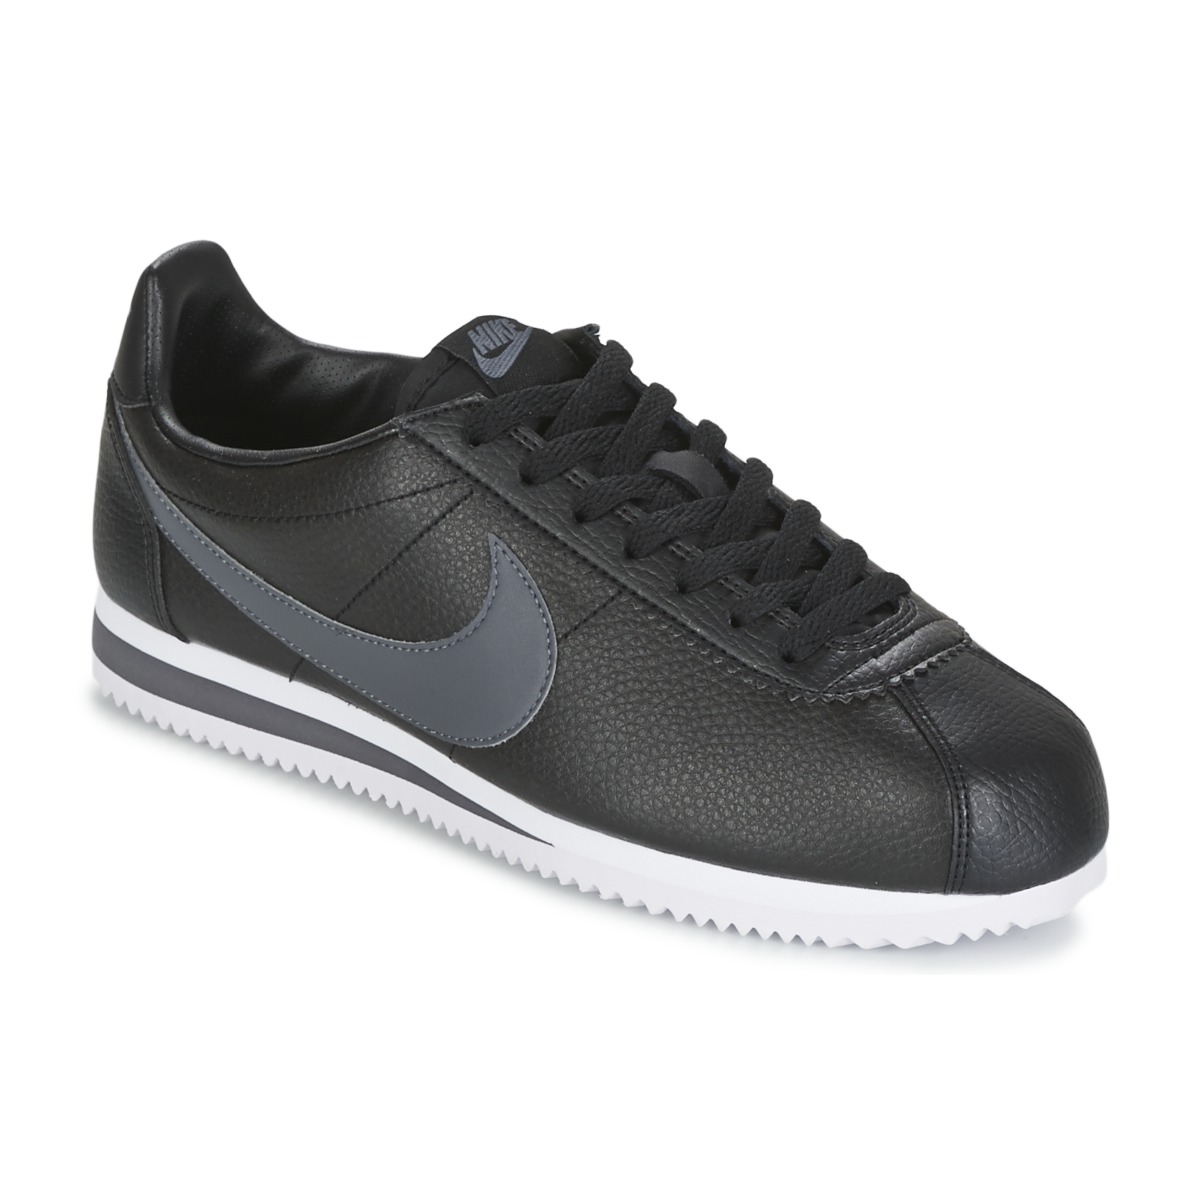 nike homme chaussure, Chaussures Homme Baskets basses Nike CLASSIC CORTEZ LEATHER Noir / Gris